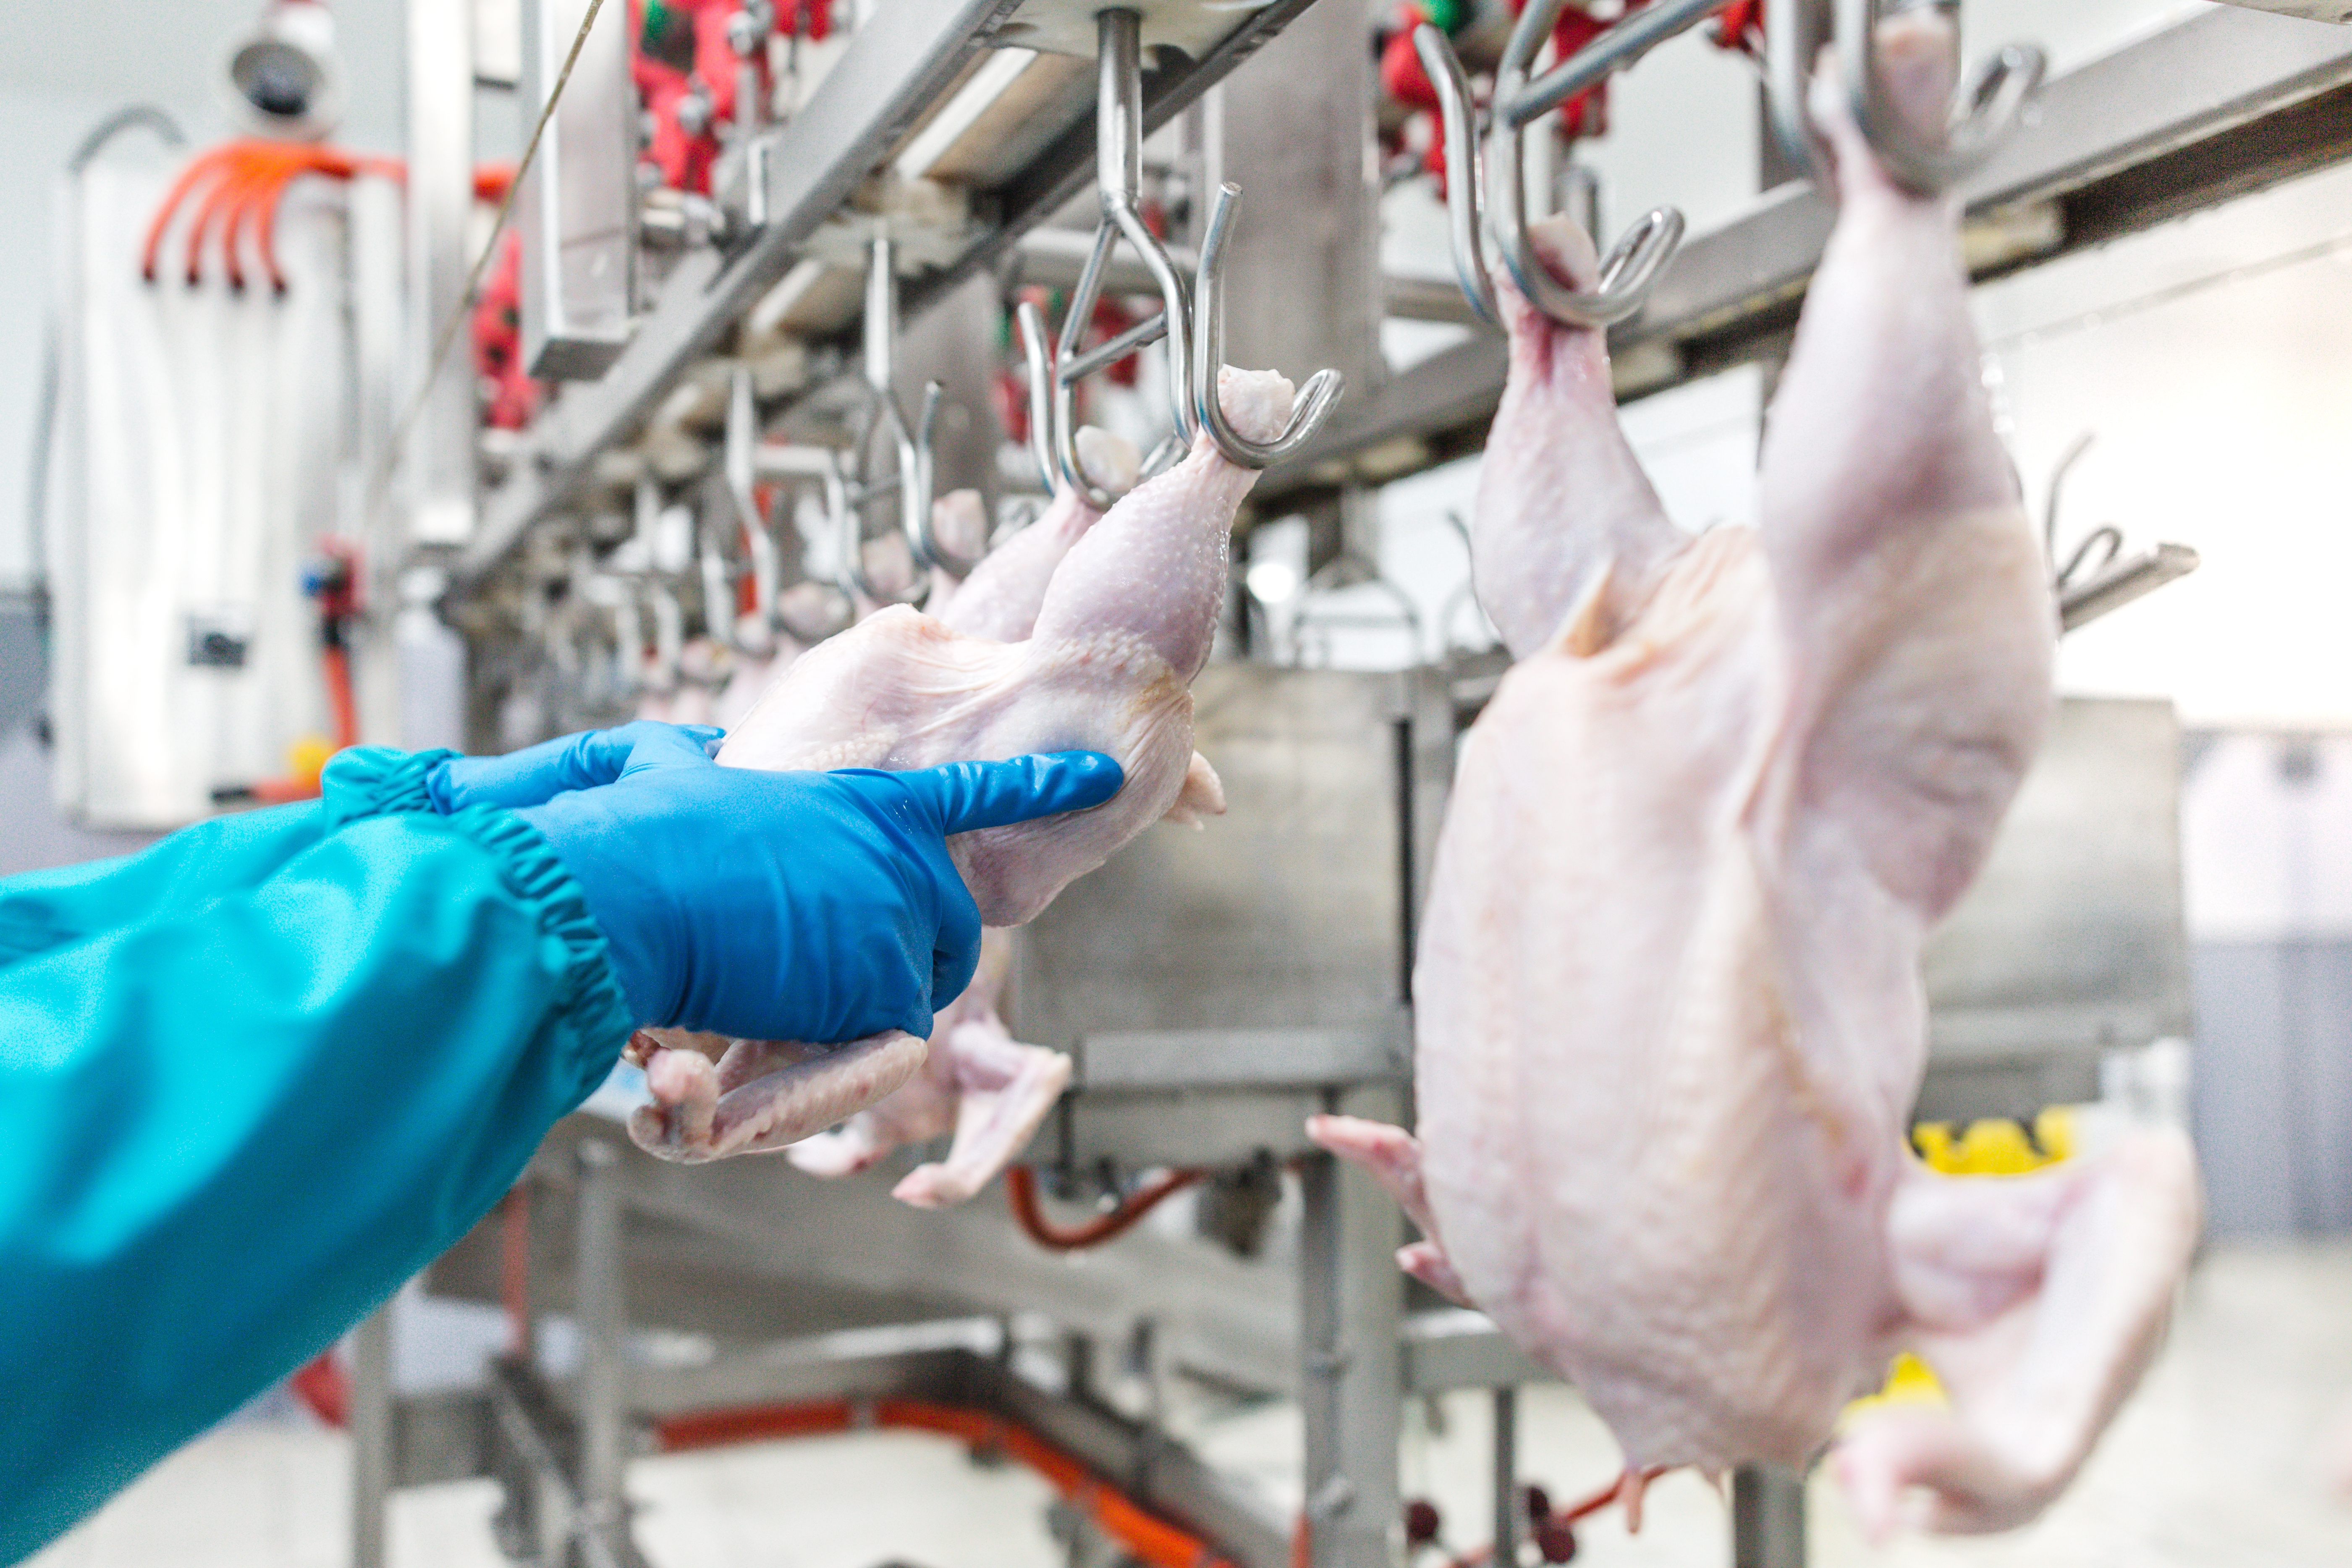 Poultry carcasses being put on a processing line